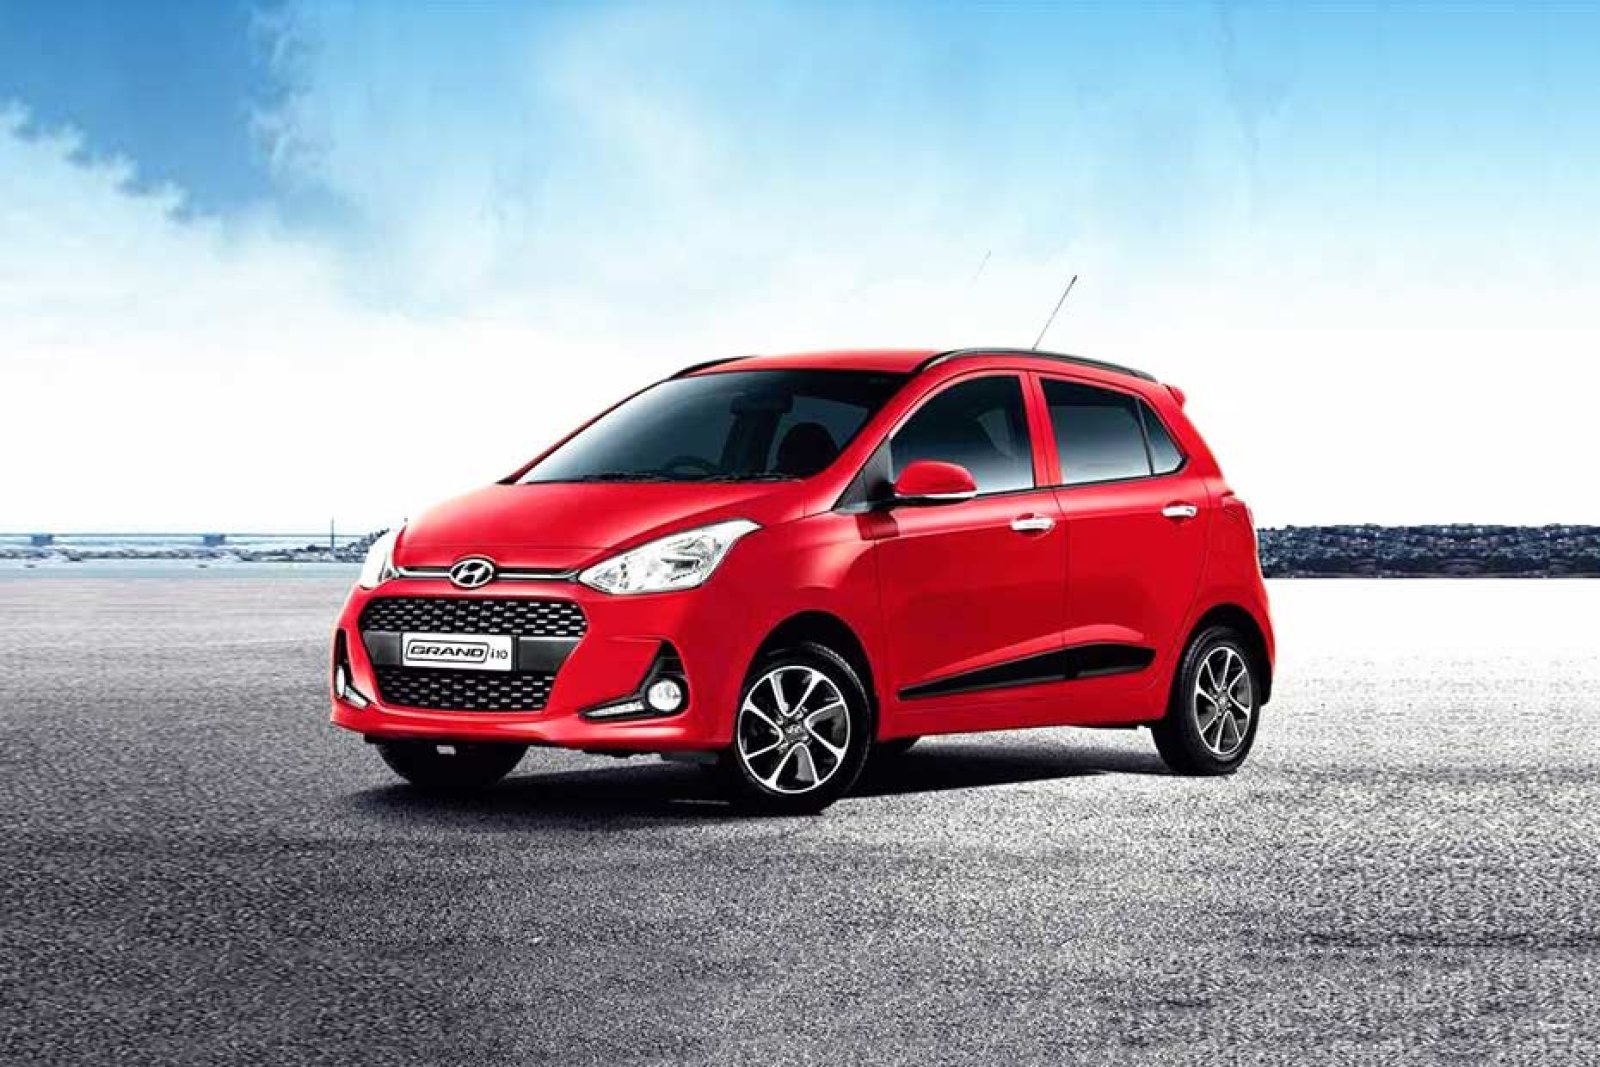 Bumper discount of up to Rs 3 lakh is available on these Hyundai cars, Grand i10, Alcazar included in the list